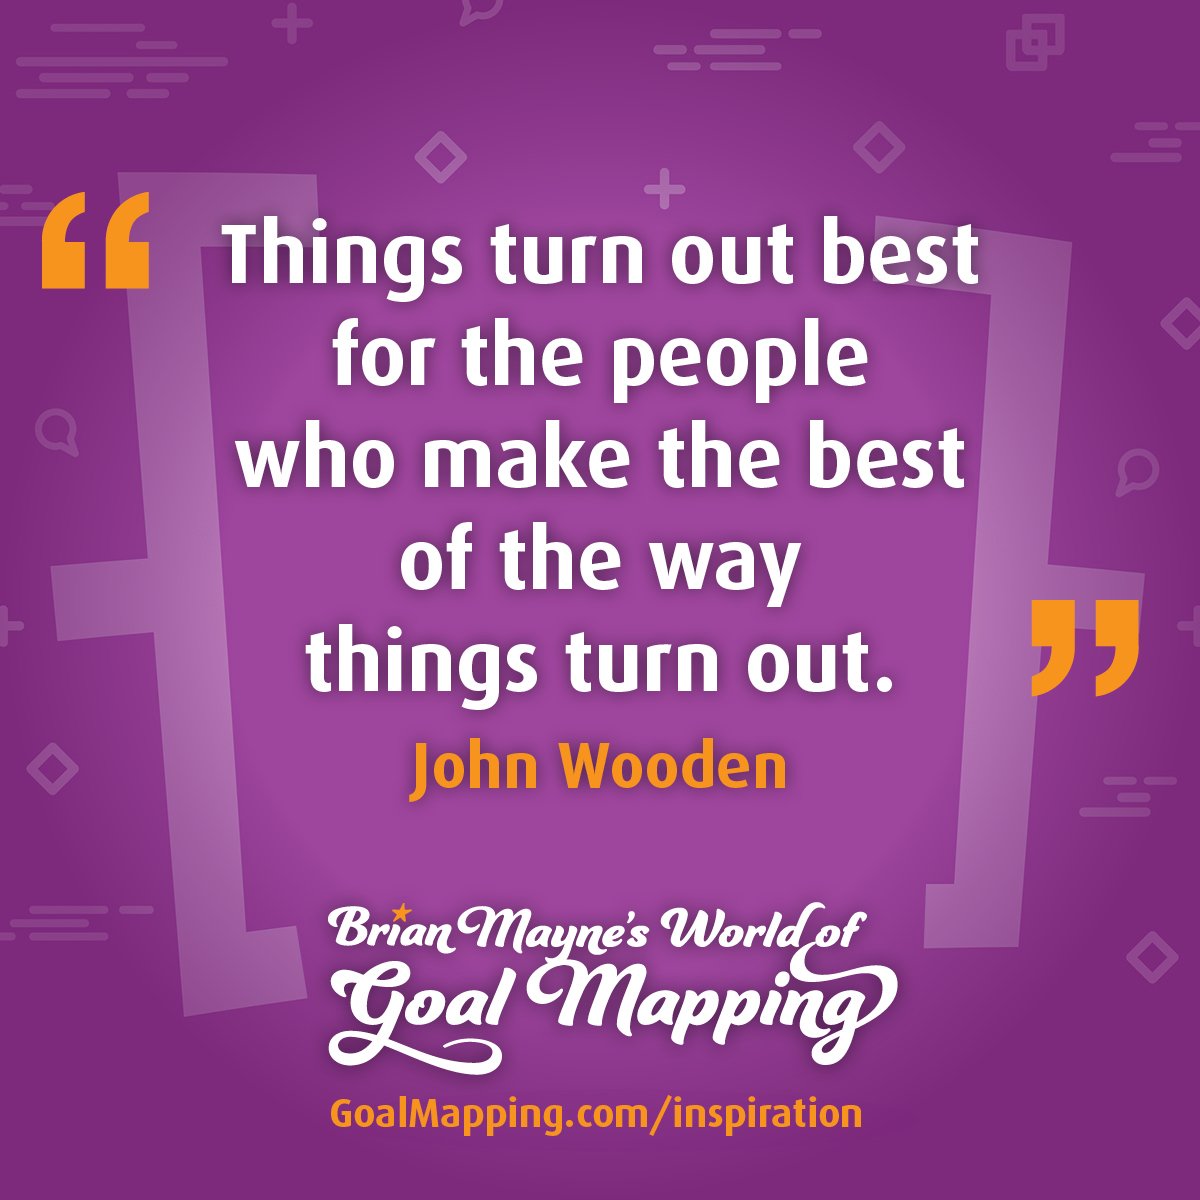 "Things turn out best for the people who make the best of the way things turn out." John Wooden